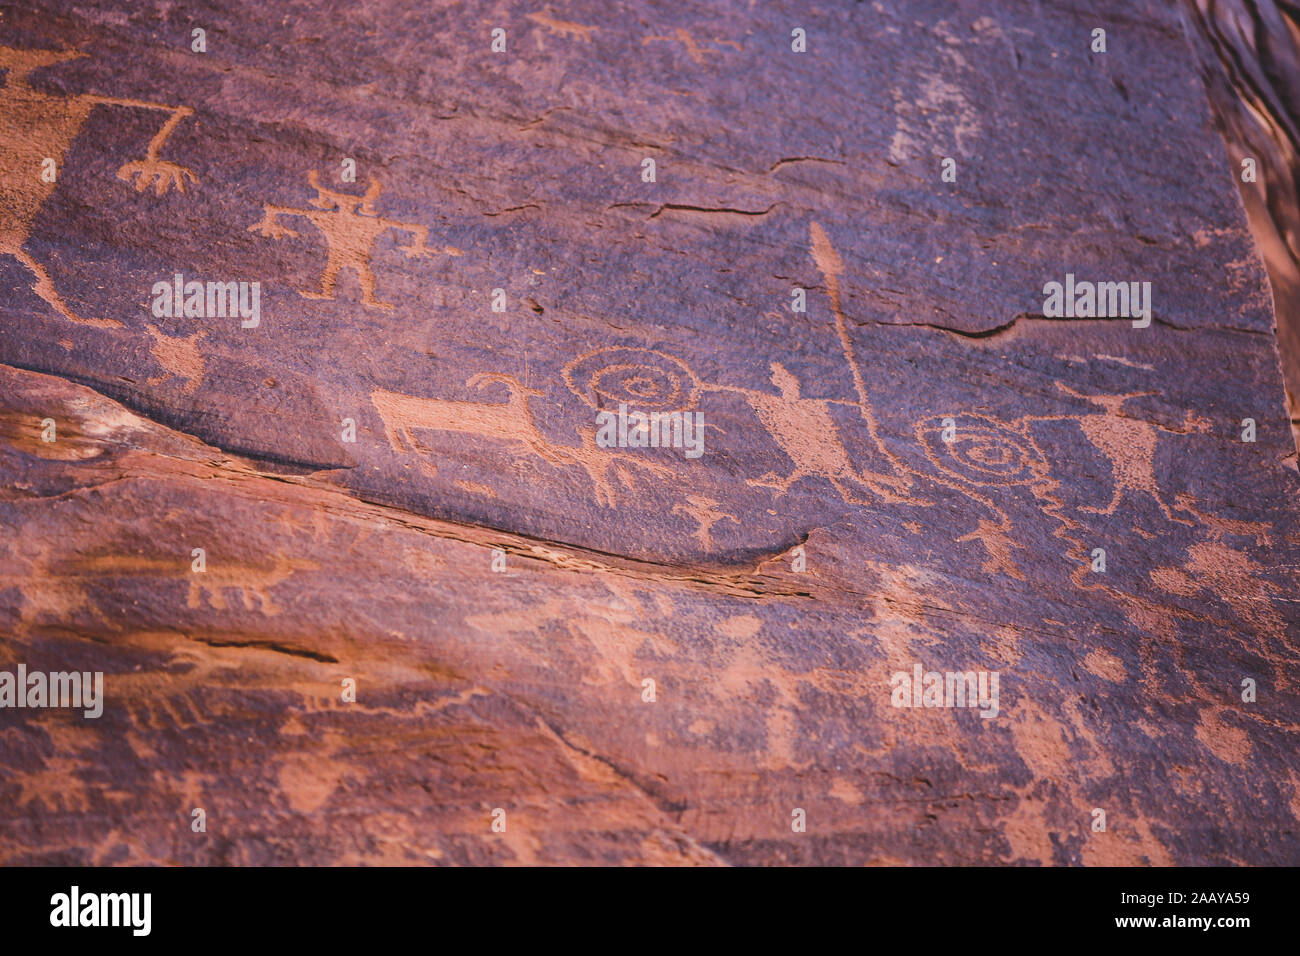 Petroglyph art rock carvings by Native Americans in red desert canyon wall in Utah Stock Photo